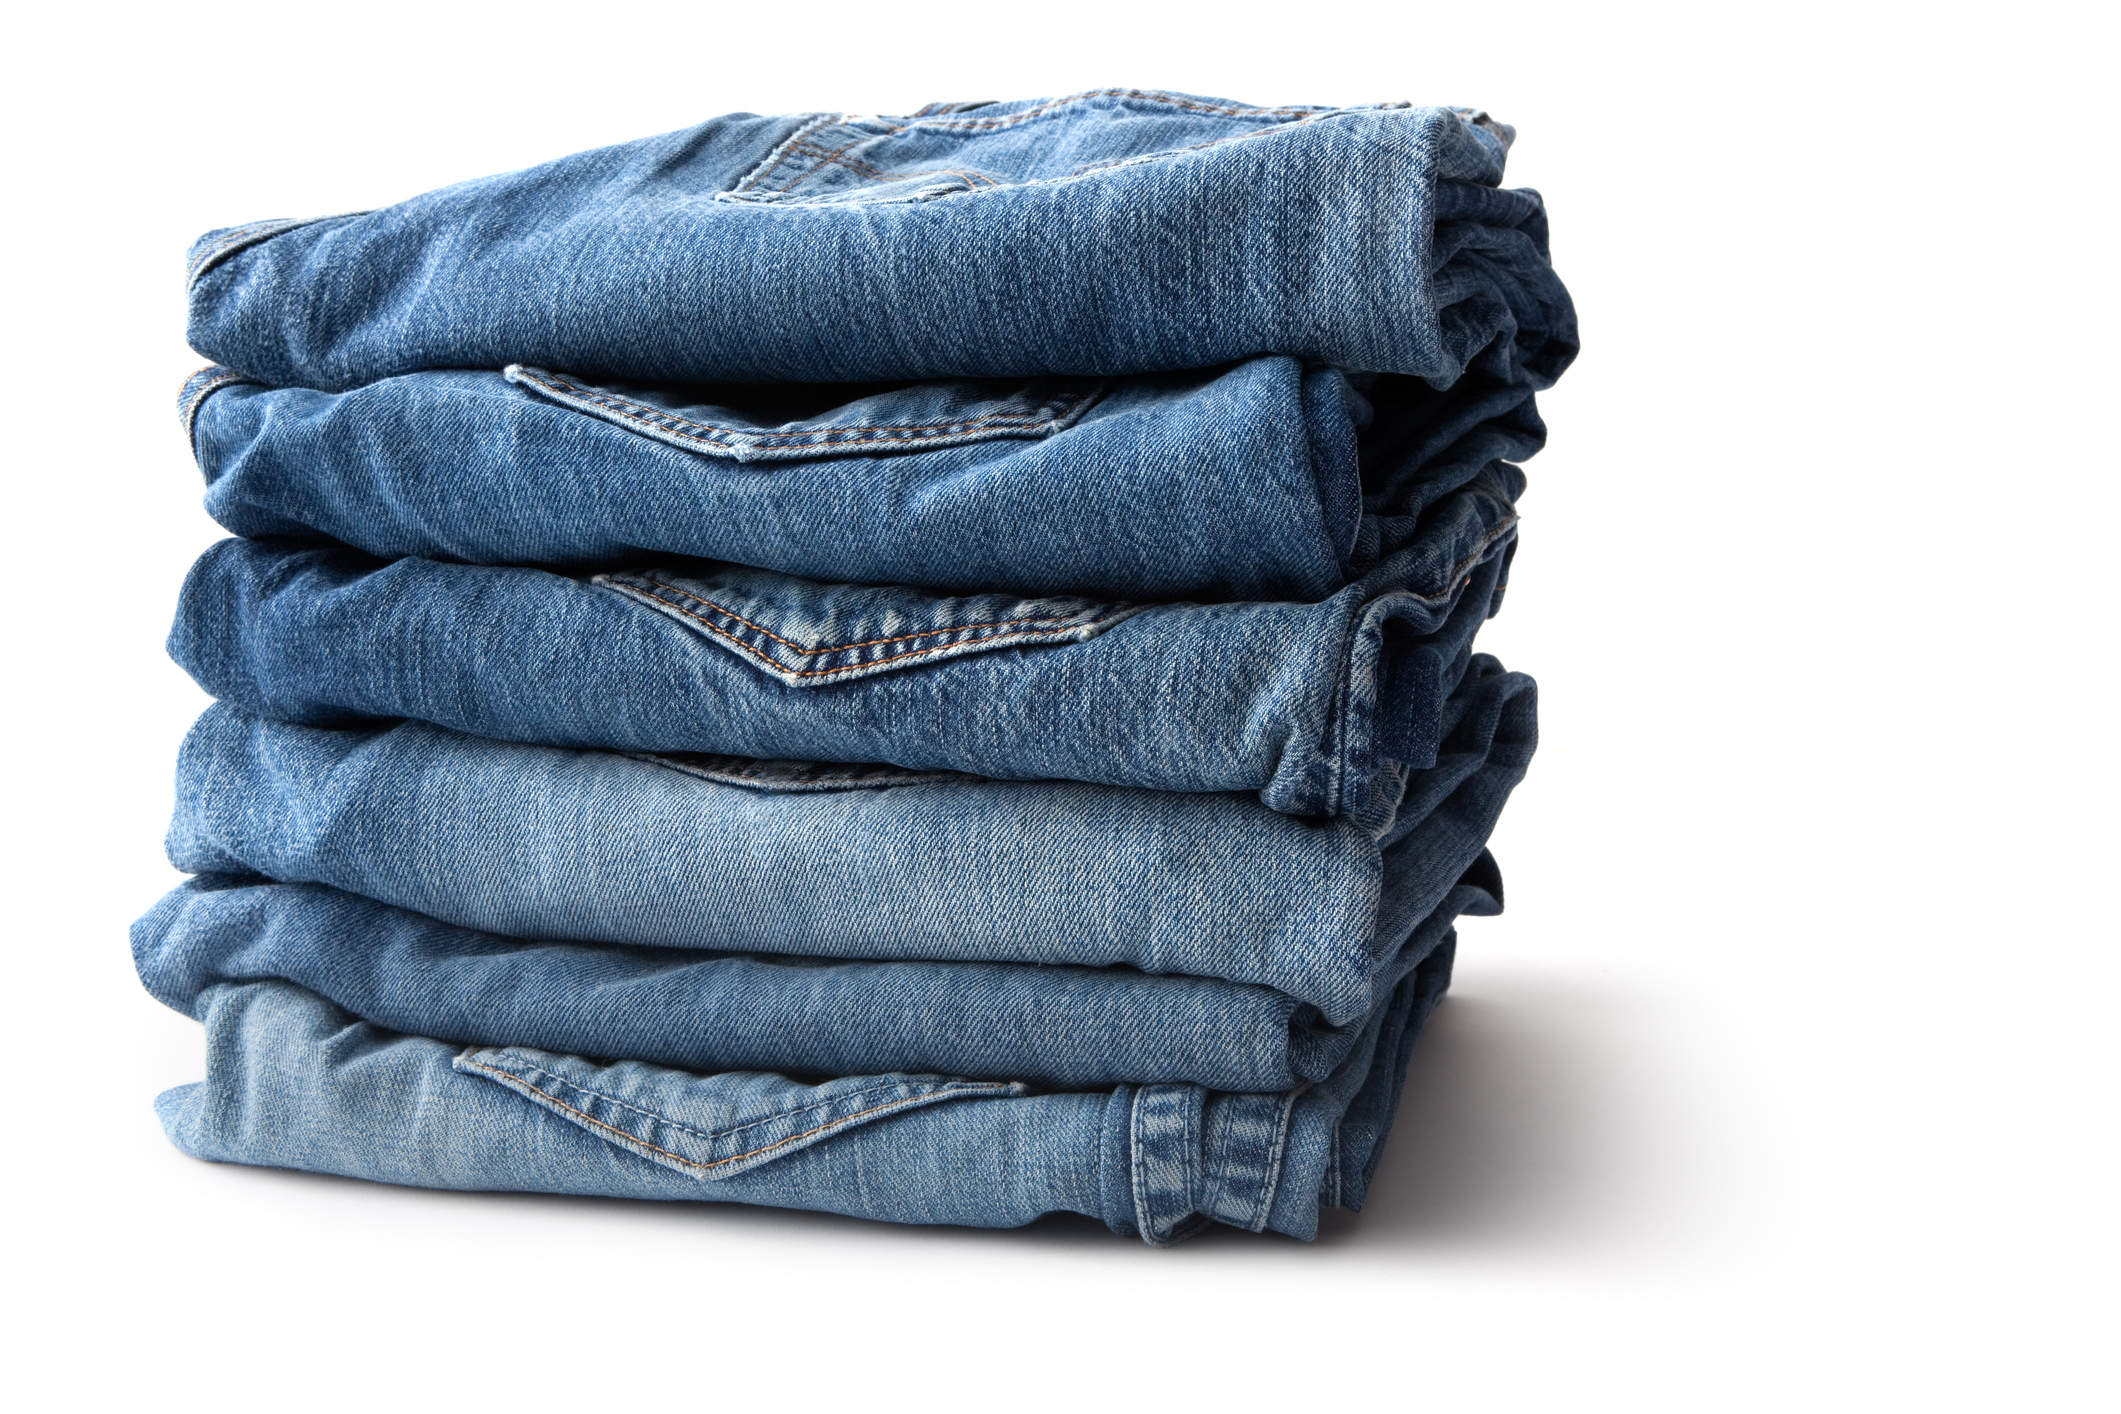 A neatly stacked pile of various shades of blue denim jeans